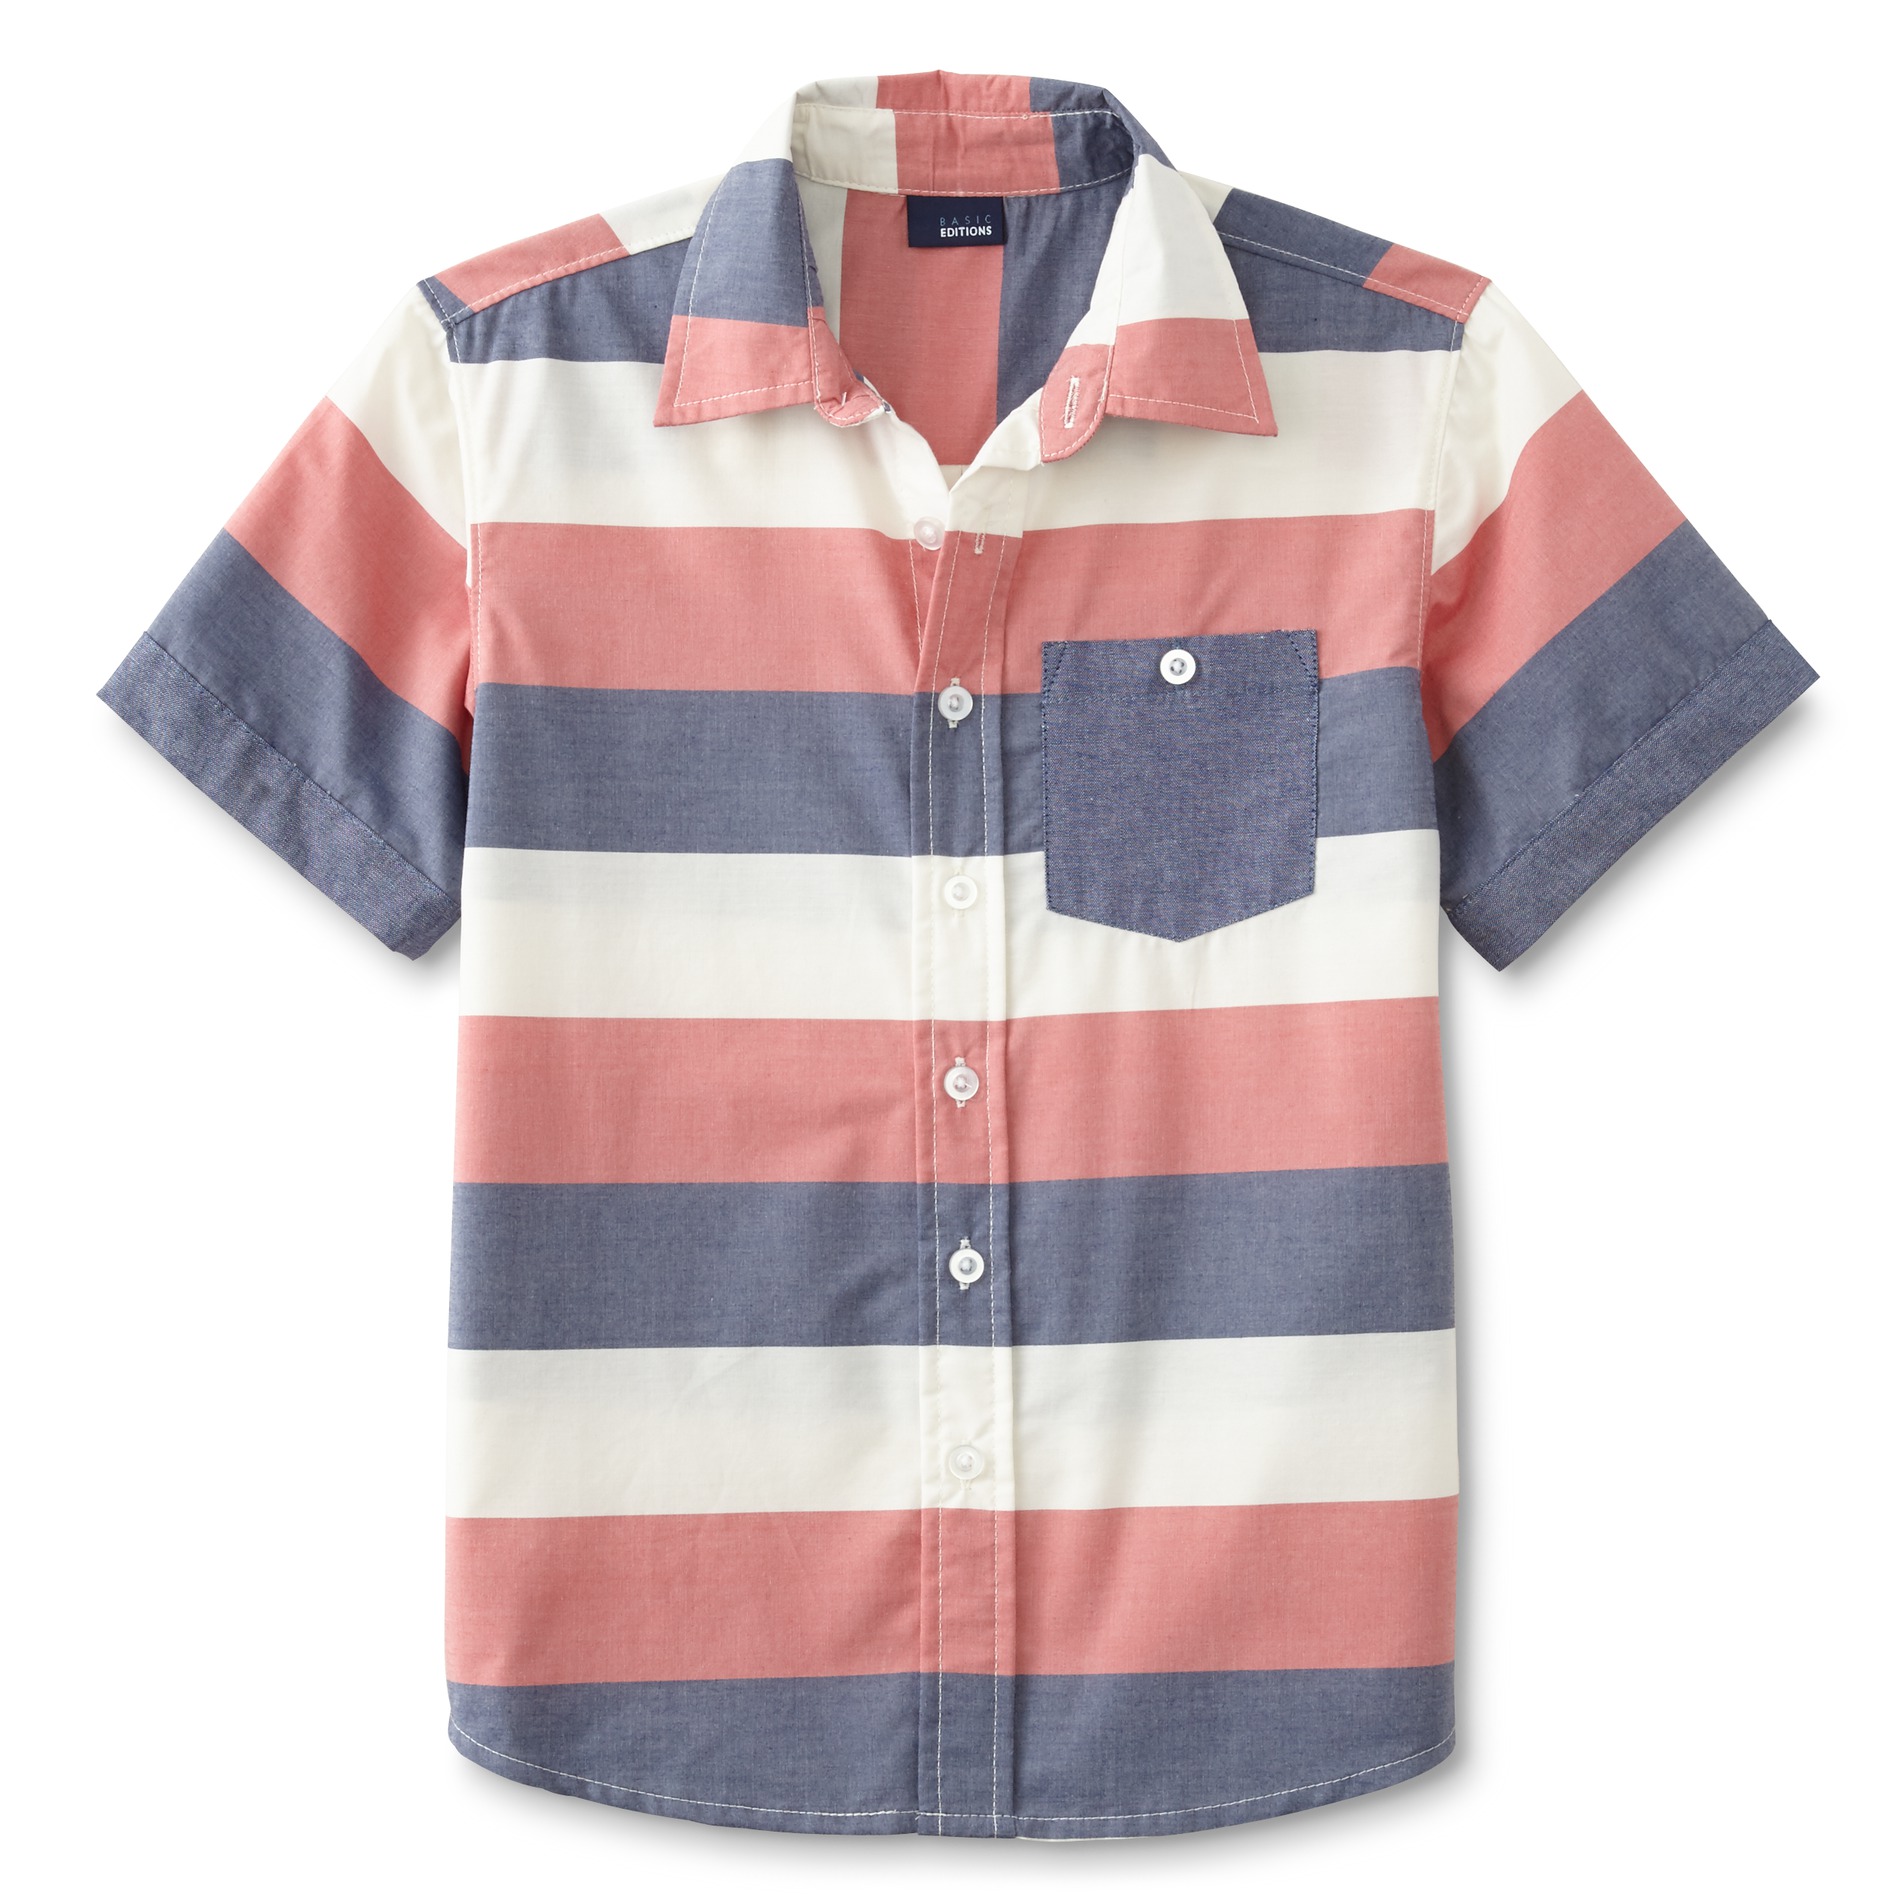 Basic Editions Boy's Button-Front Shirt - Striped